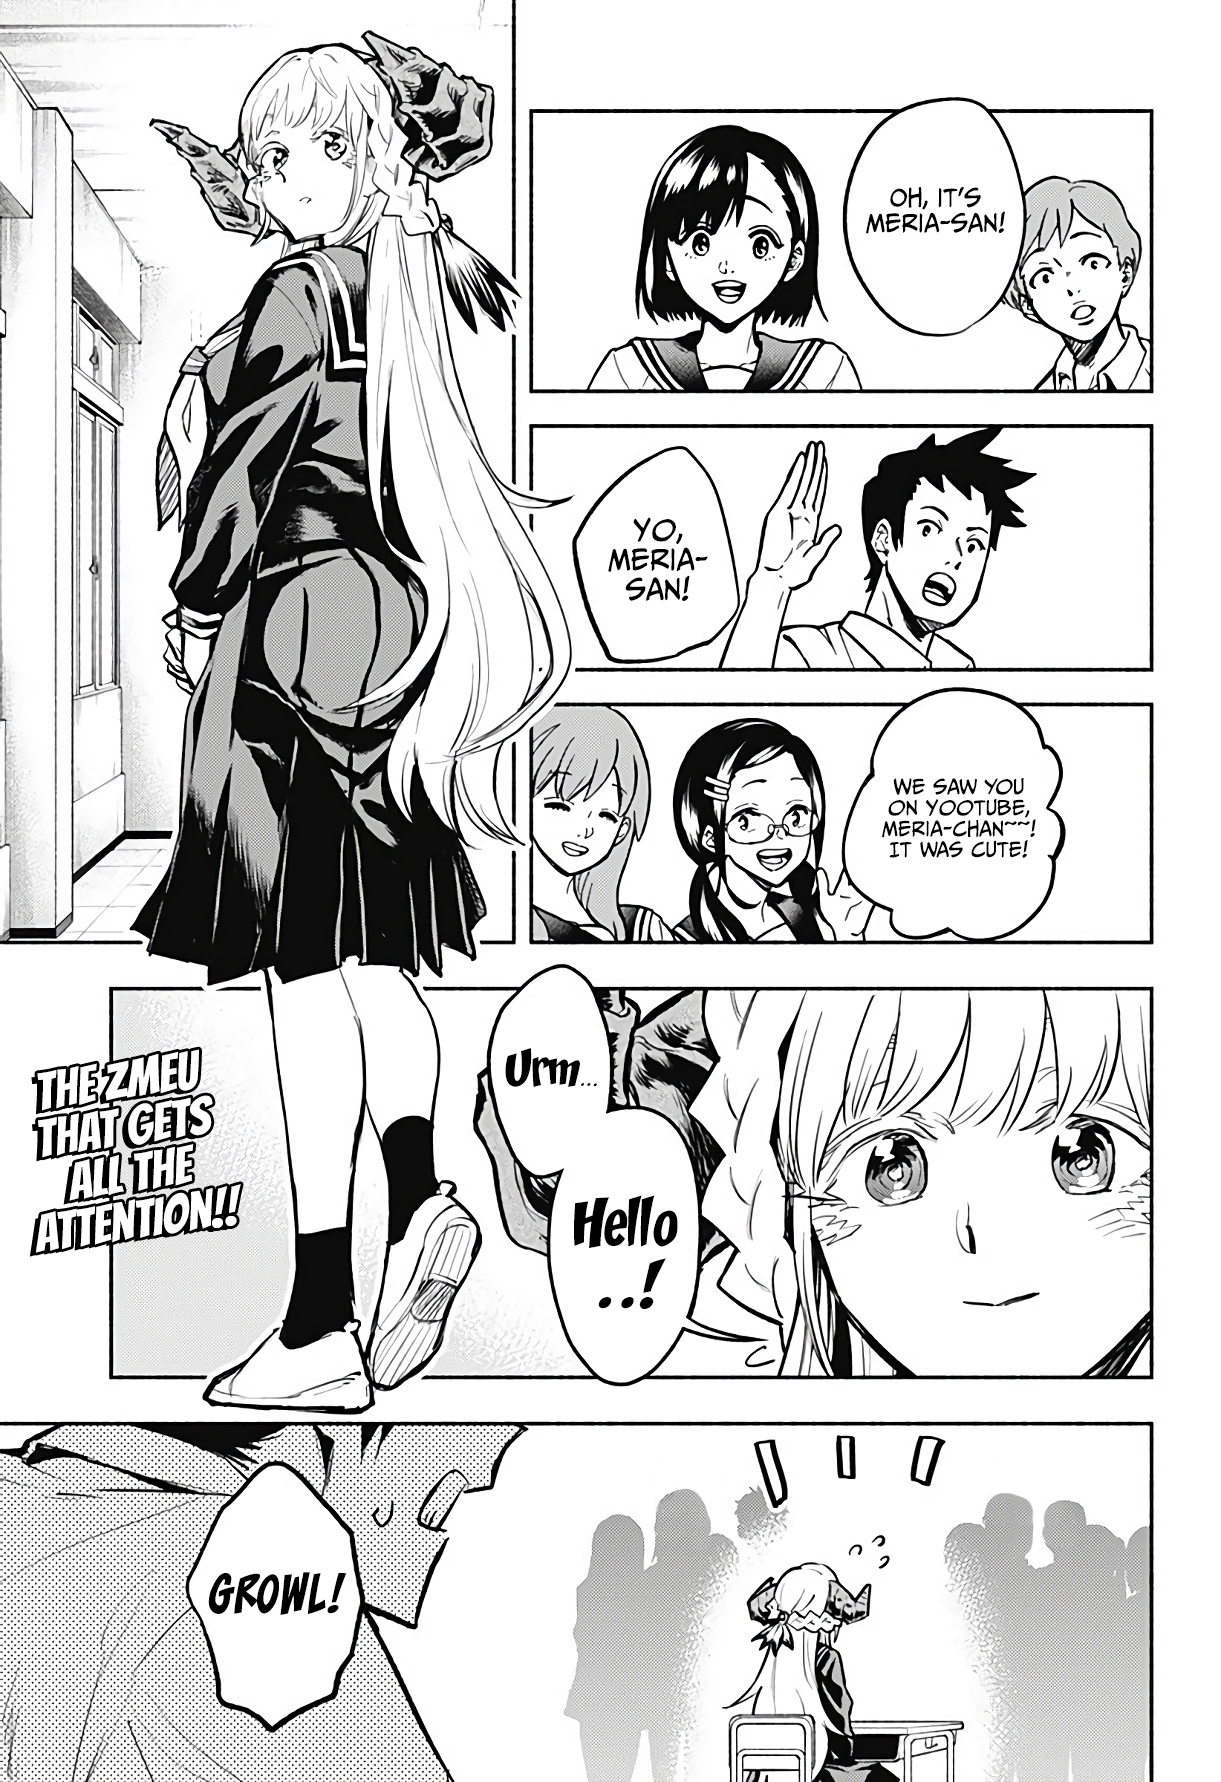 That Dragon (Exchange) Student Stands Out More Than Me - Page 2